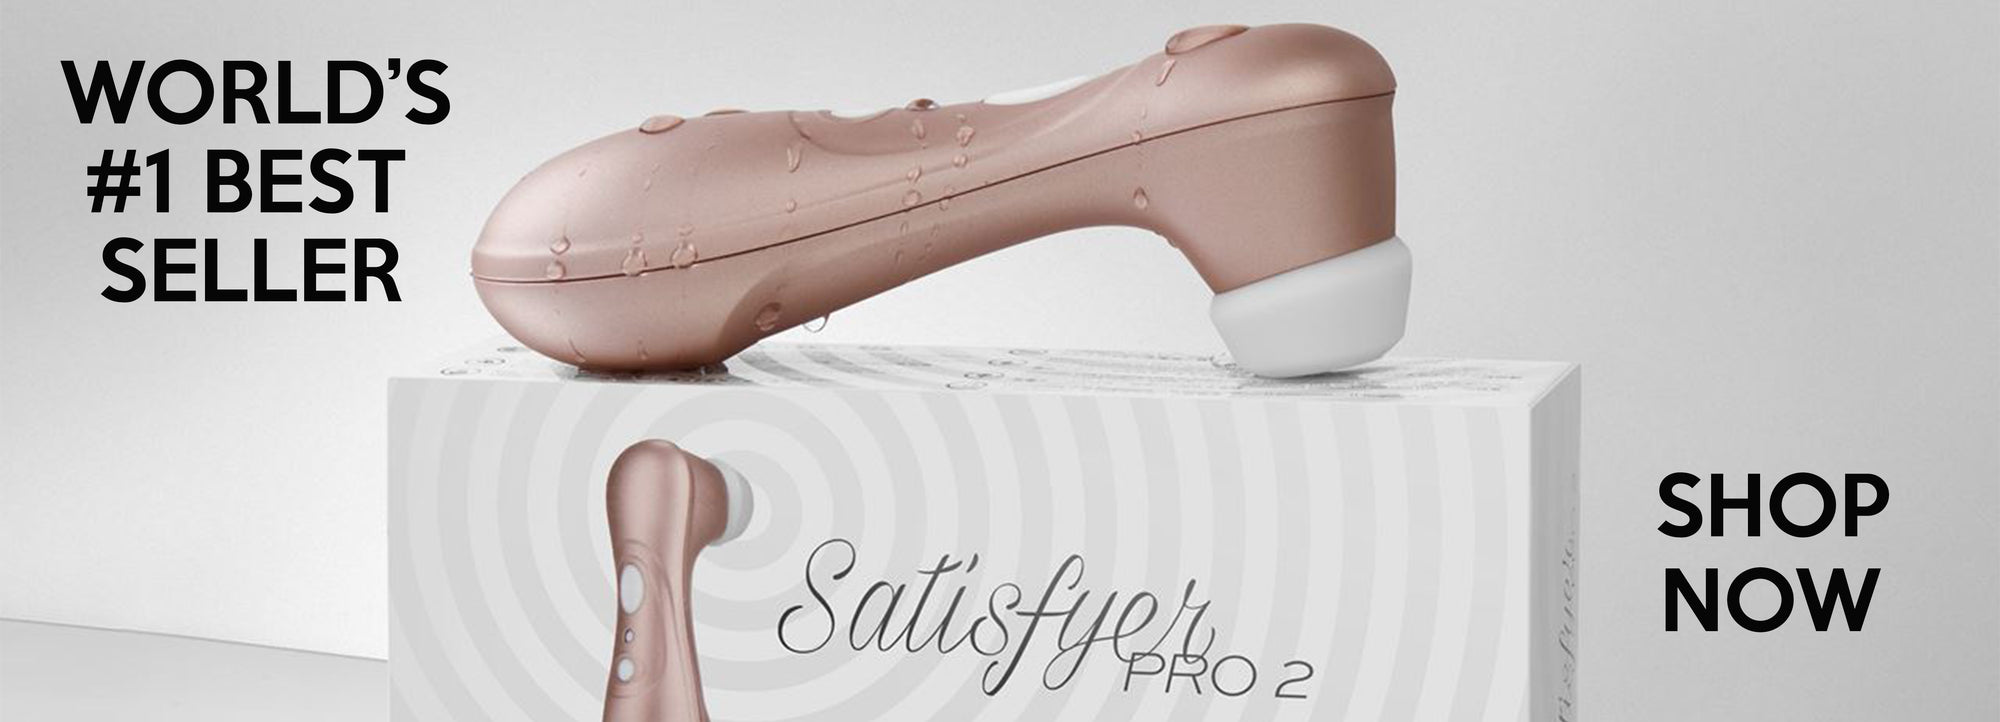 Satisfyer - Totally Adult